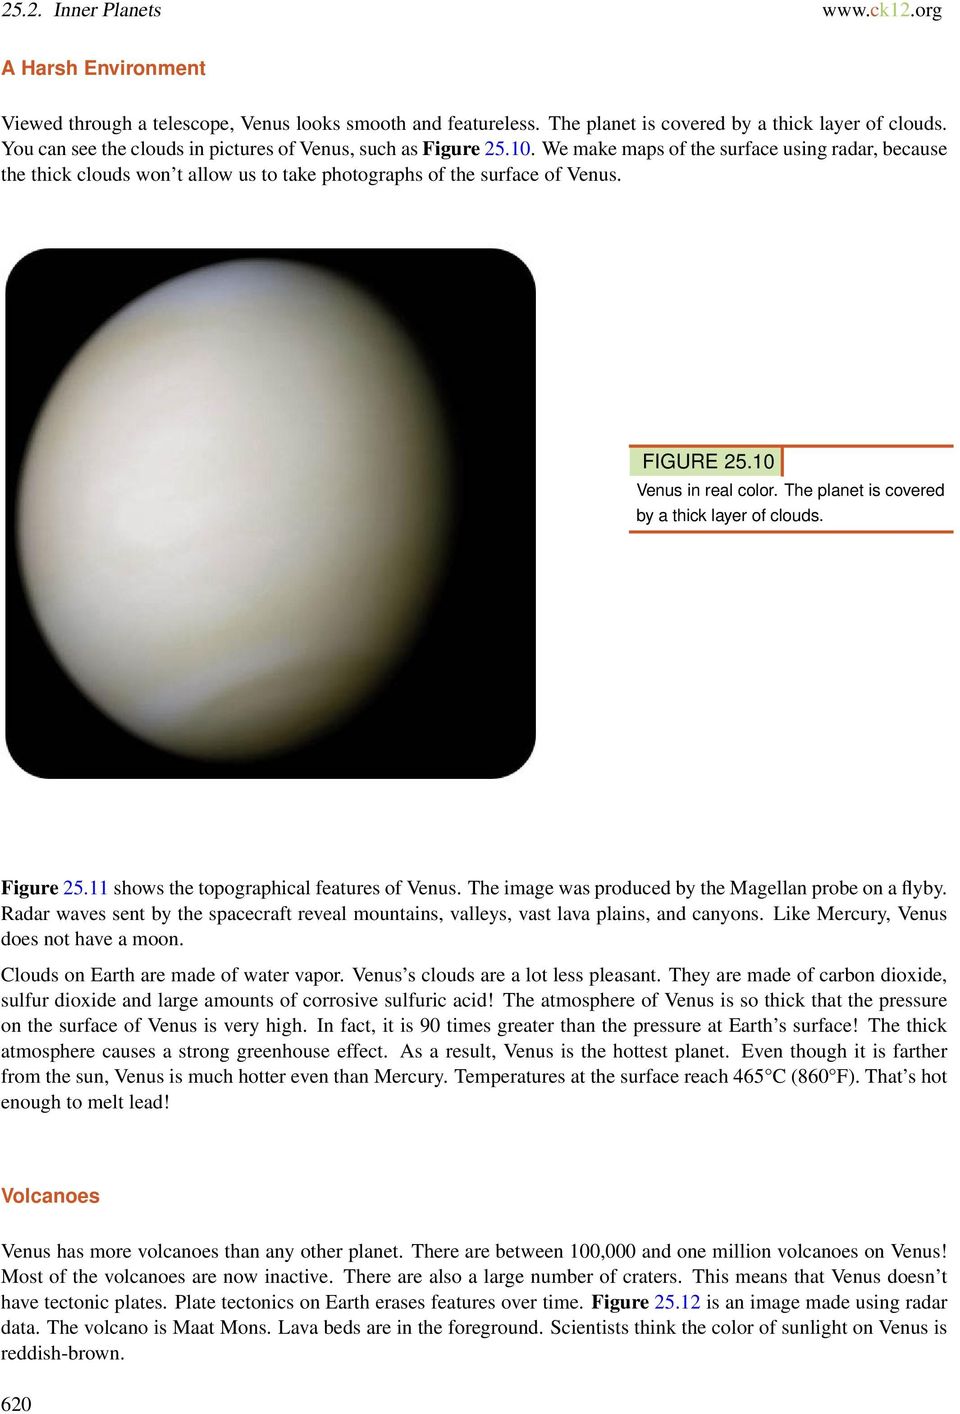 FIGURE 25.10 Venus in real color. The planet is covered by a thick layer of clouds. Figure 25.11 shows the topographical features of Venus. The image was produced by the Magellan probe on a flyby.